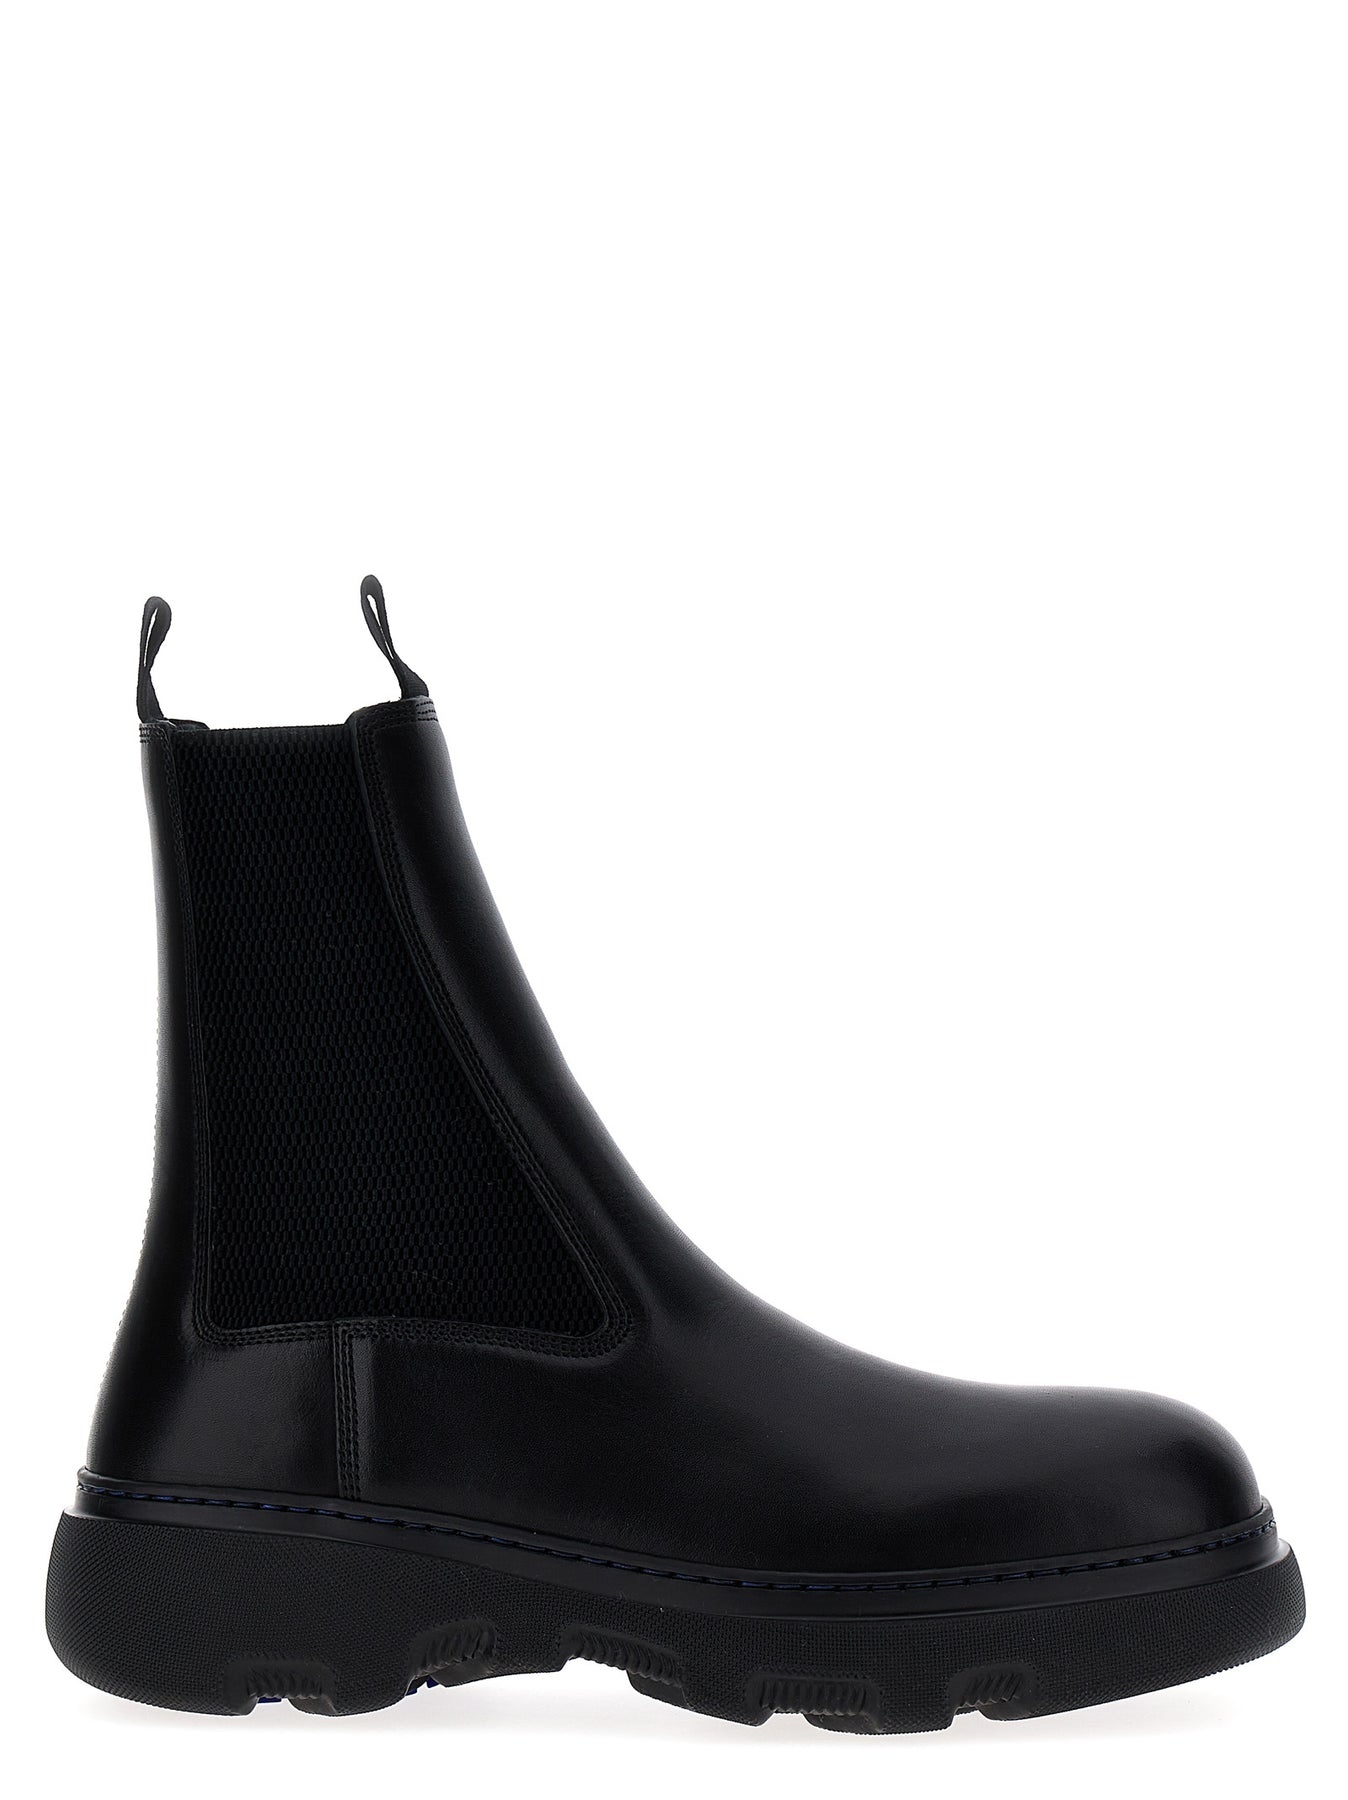 Chelsea Boots, Ankle Boots Black - 1